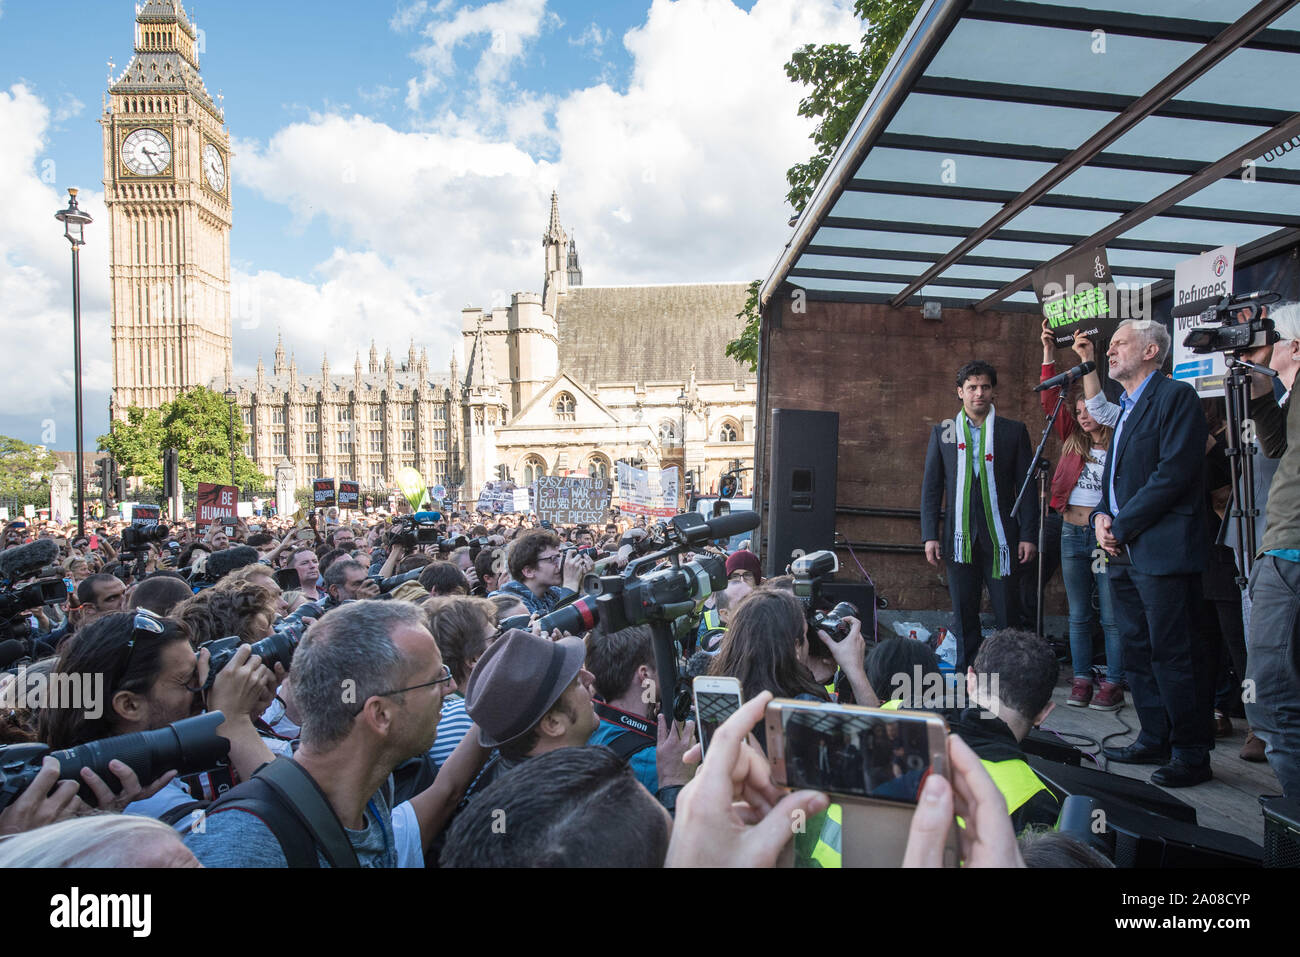 Parliament Square, London, UK. 12th September, 2015. The newly elected leader of the Labour Party, Jeremy Corbyn, gives a speech in front of thousands Stock Photo